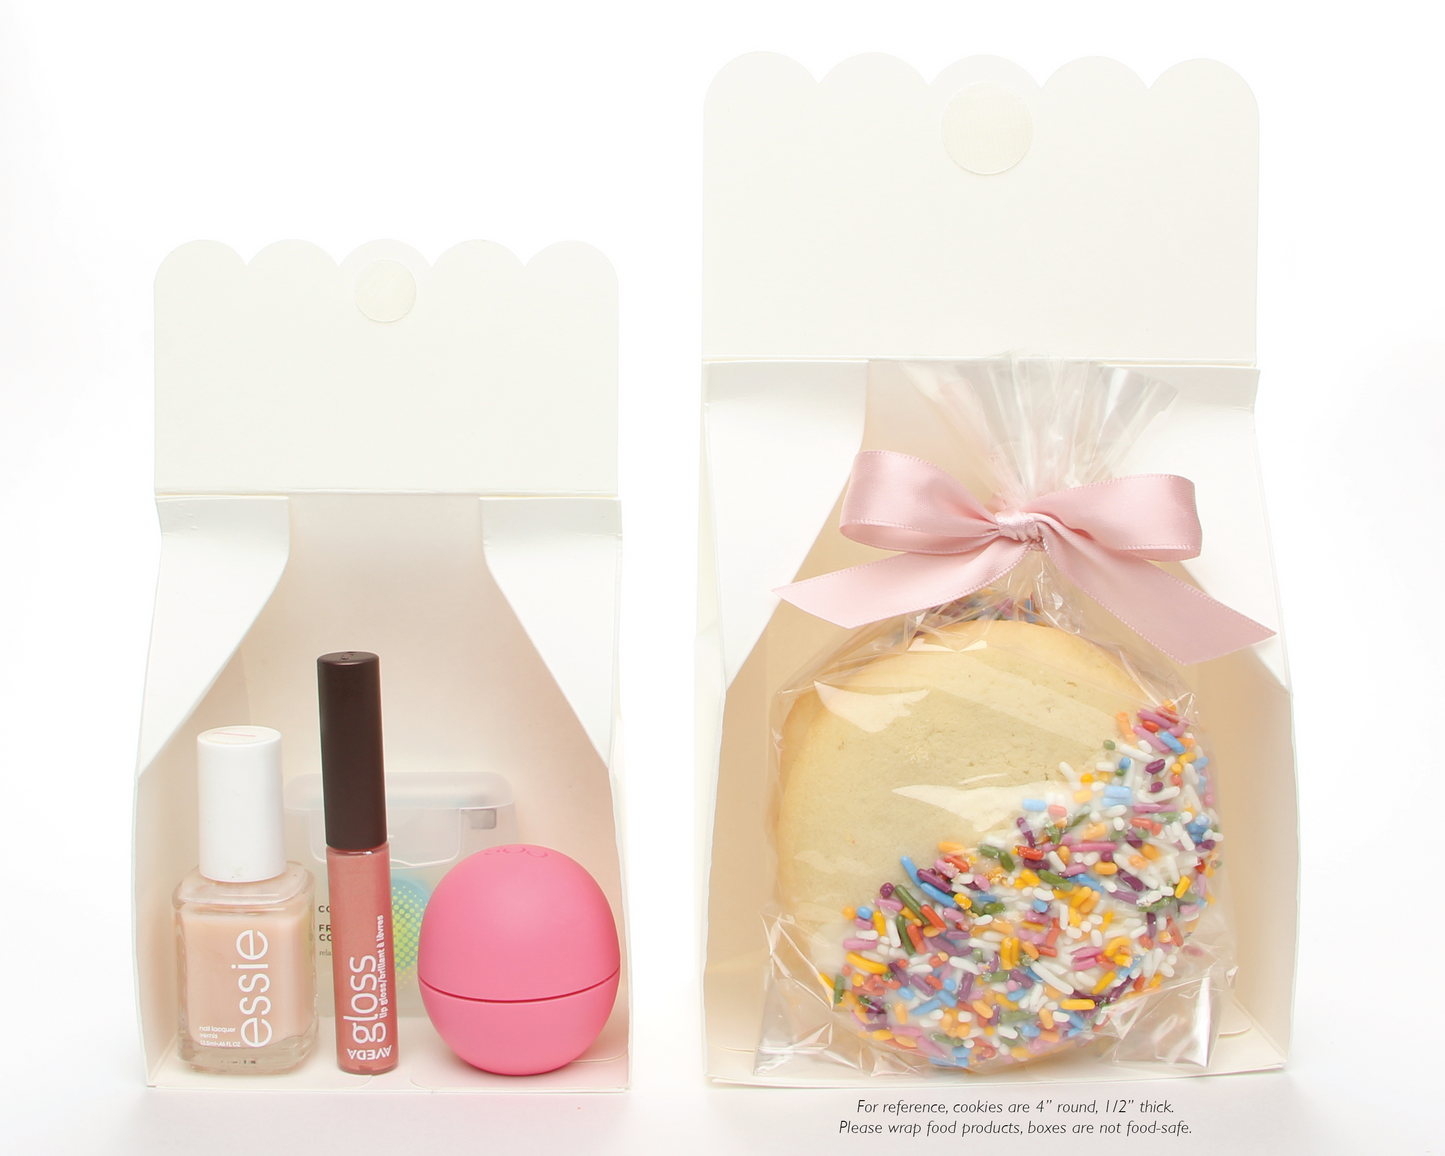 Cut away view of Lux Party’s small white favor box and large white favor box showing contents, including beauty supplies and cookies.